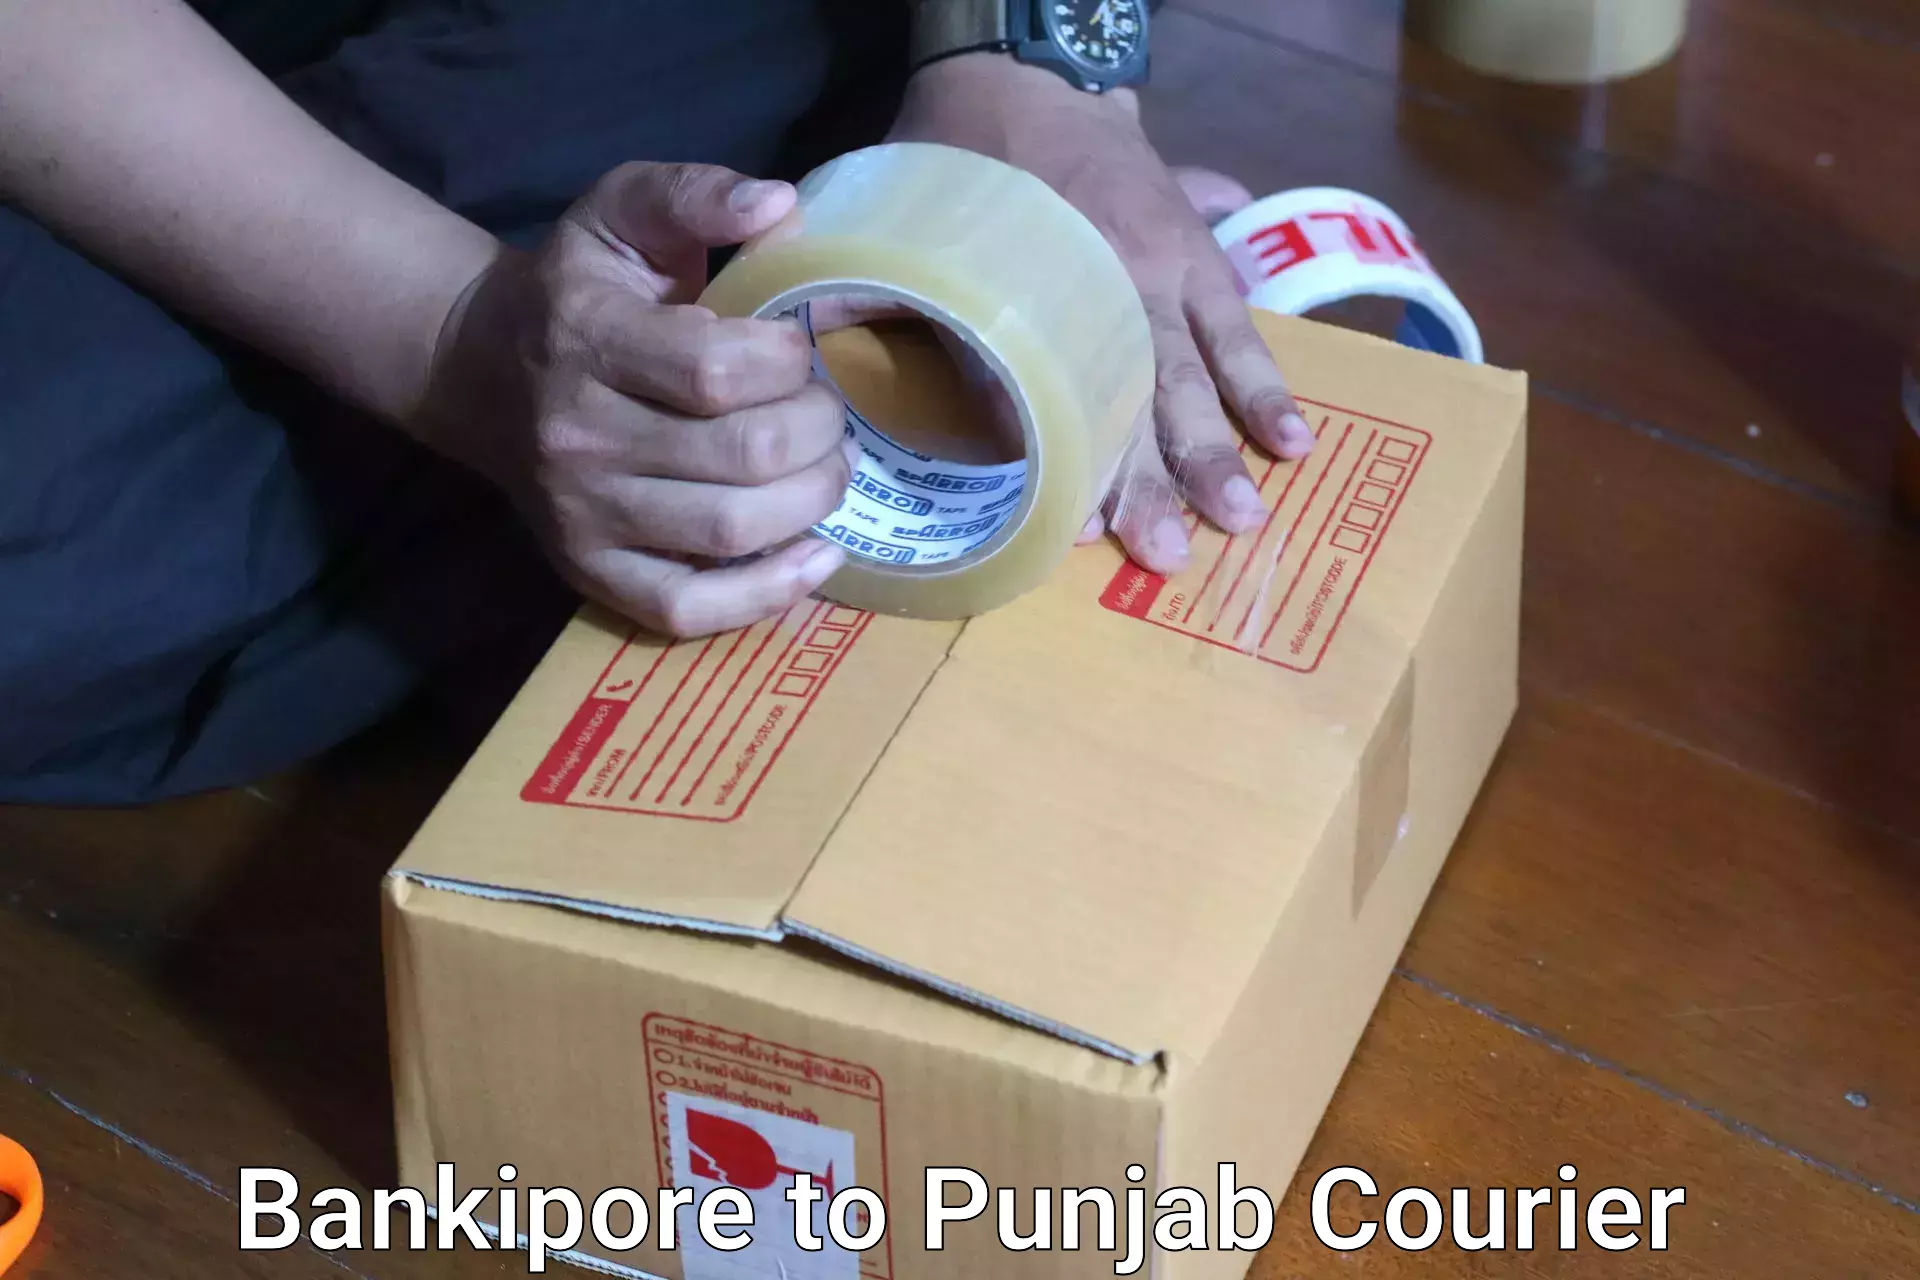 Instant baggage transport quote Bankipore to Patiala